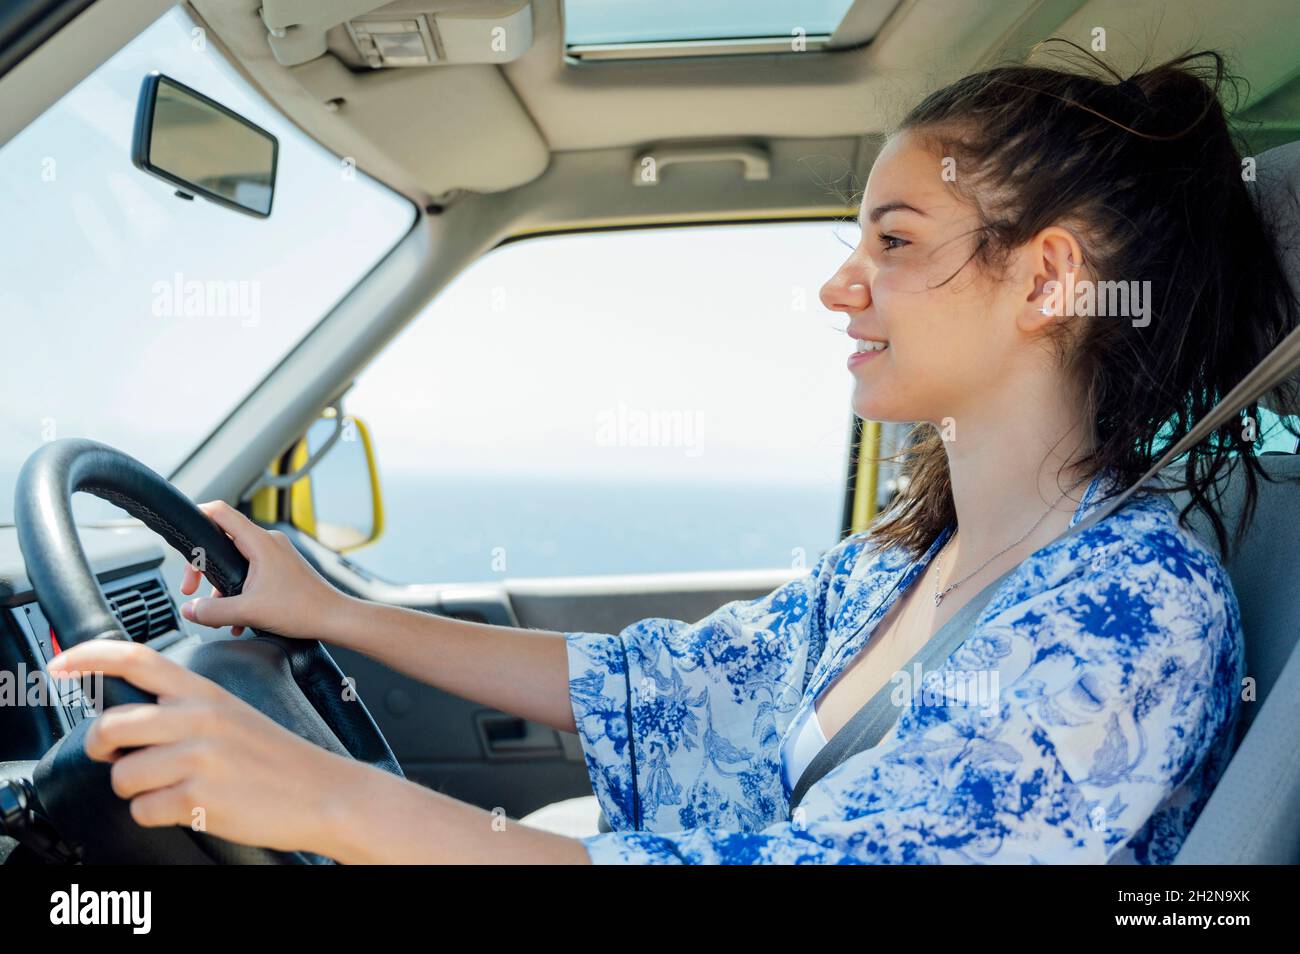 Smiling woman driving camper van during vacation Stock Photo